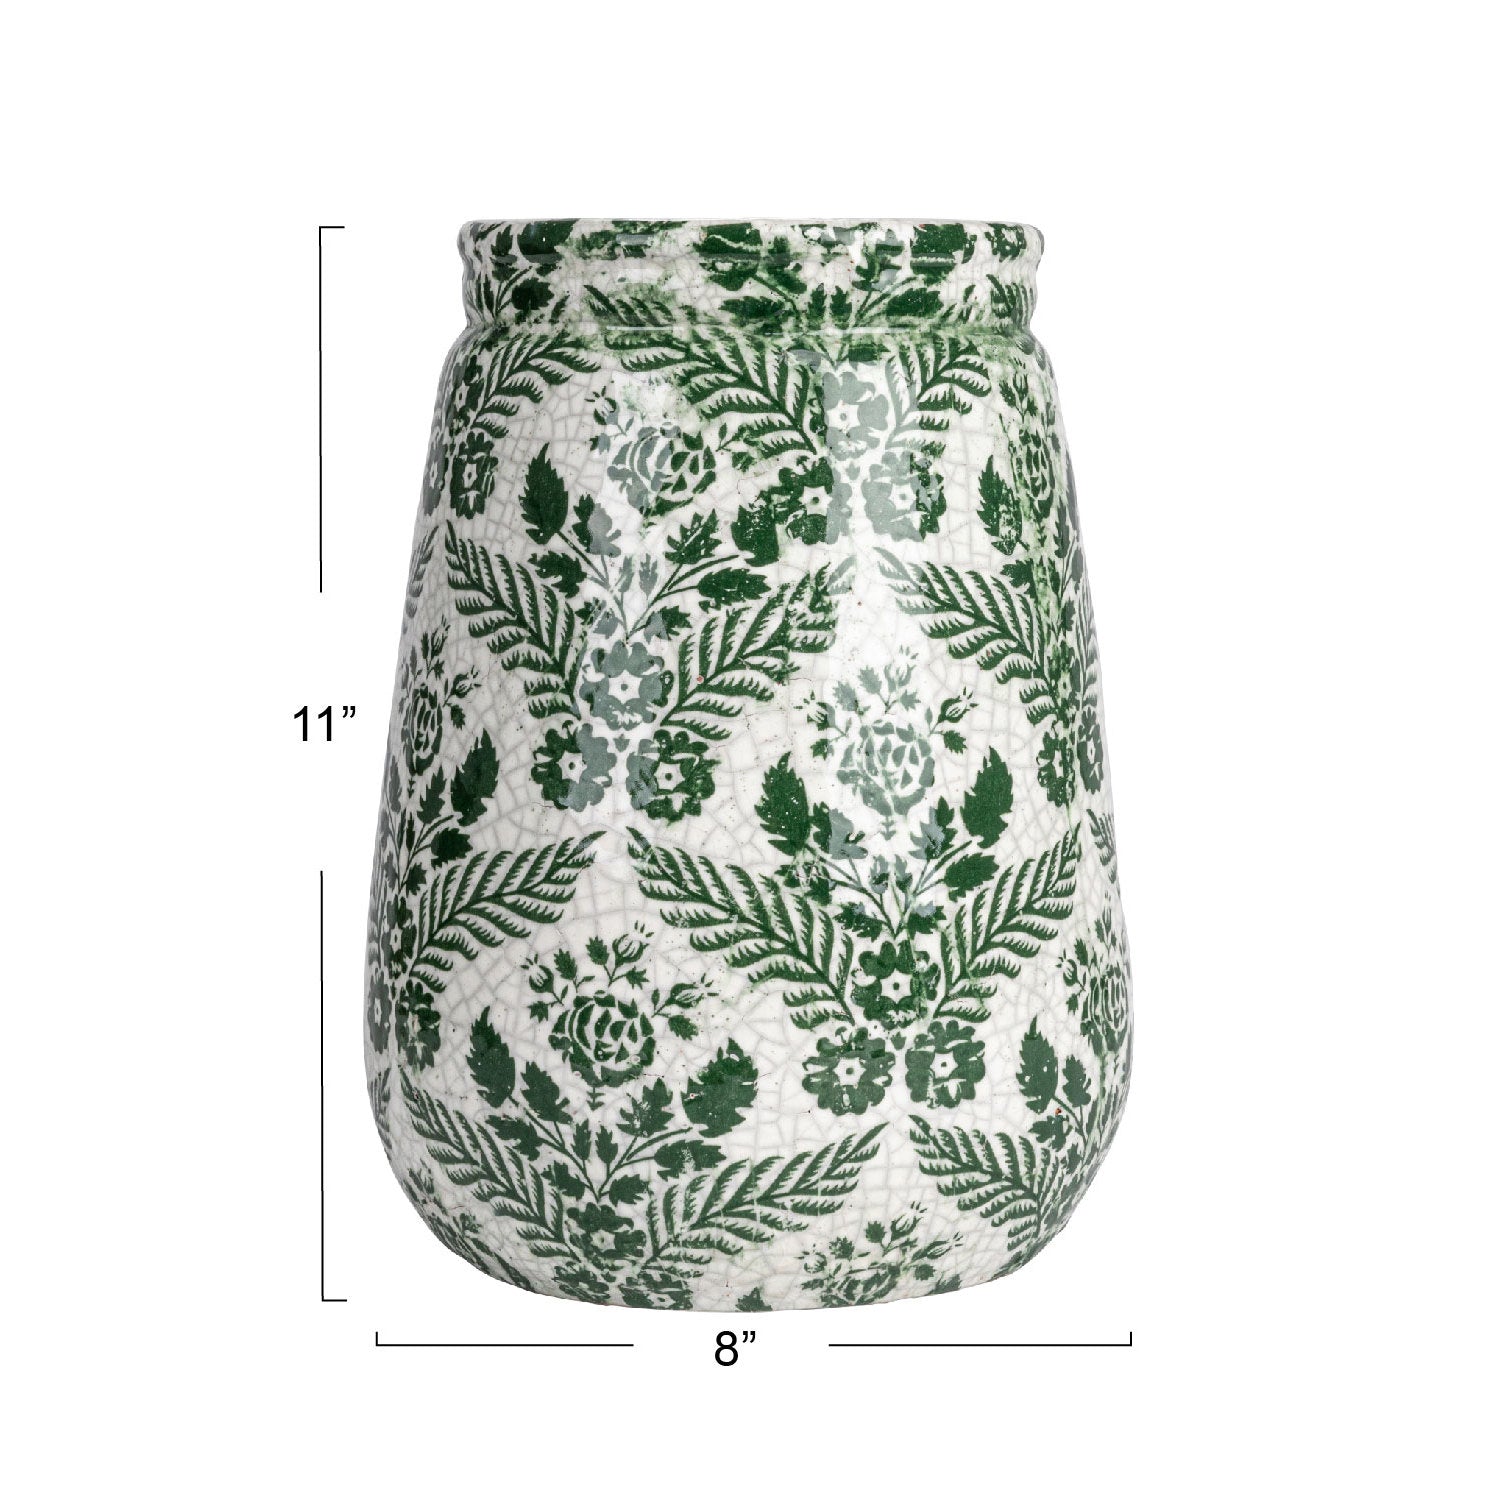 The Terracotta Planter/Vase with Transferware Pattern in green and white measures 11 inches high and 8 inches wide. 